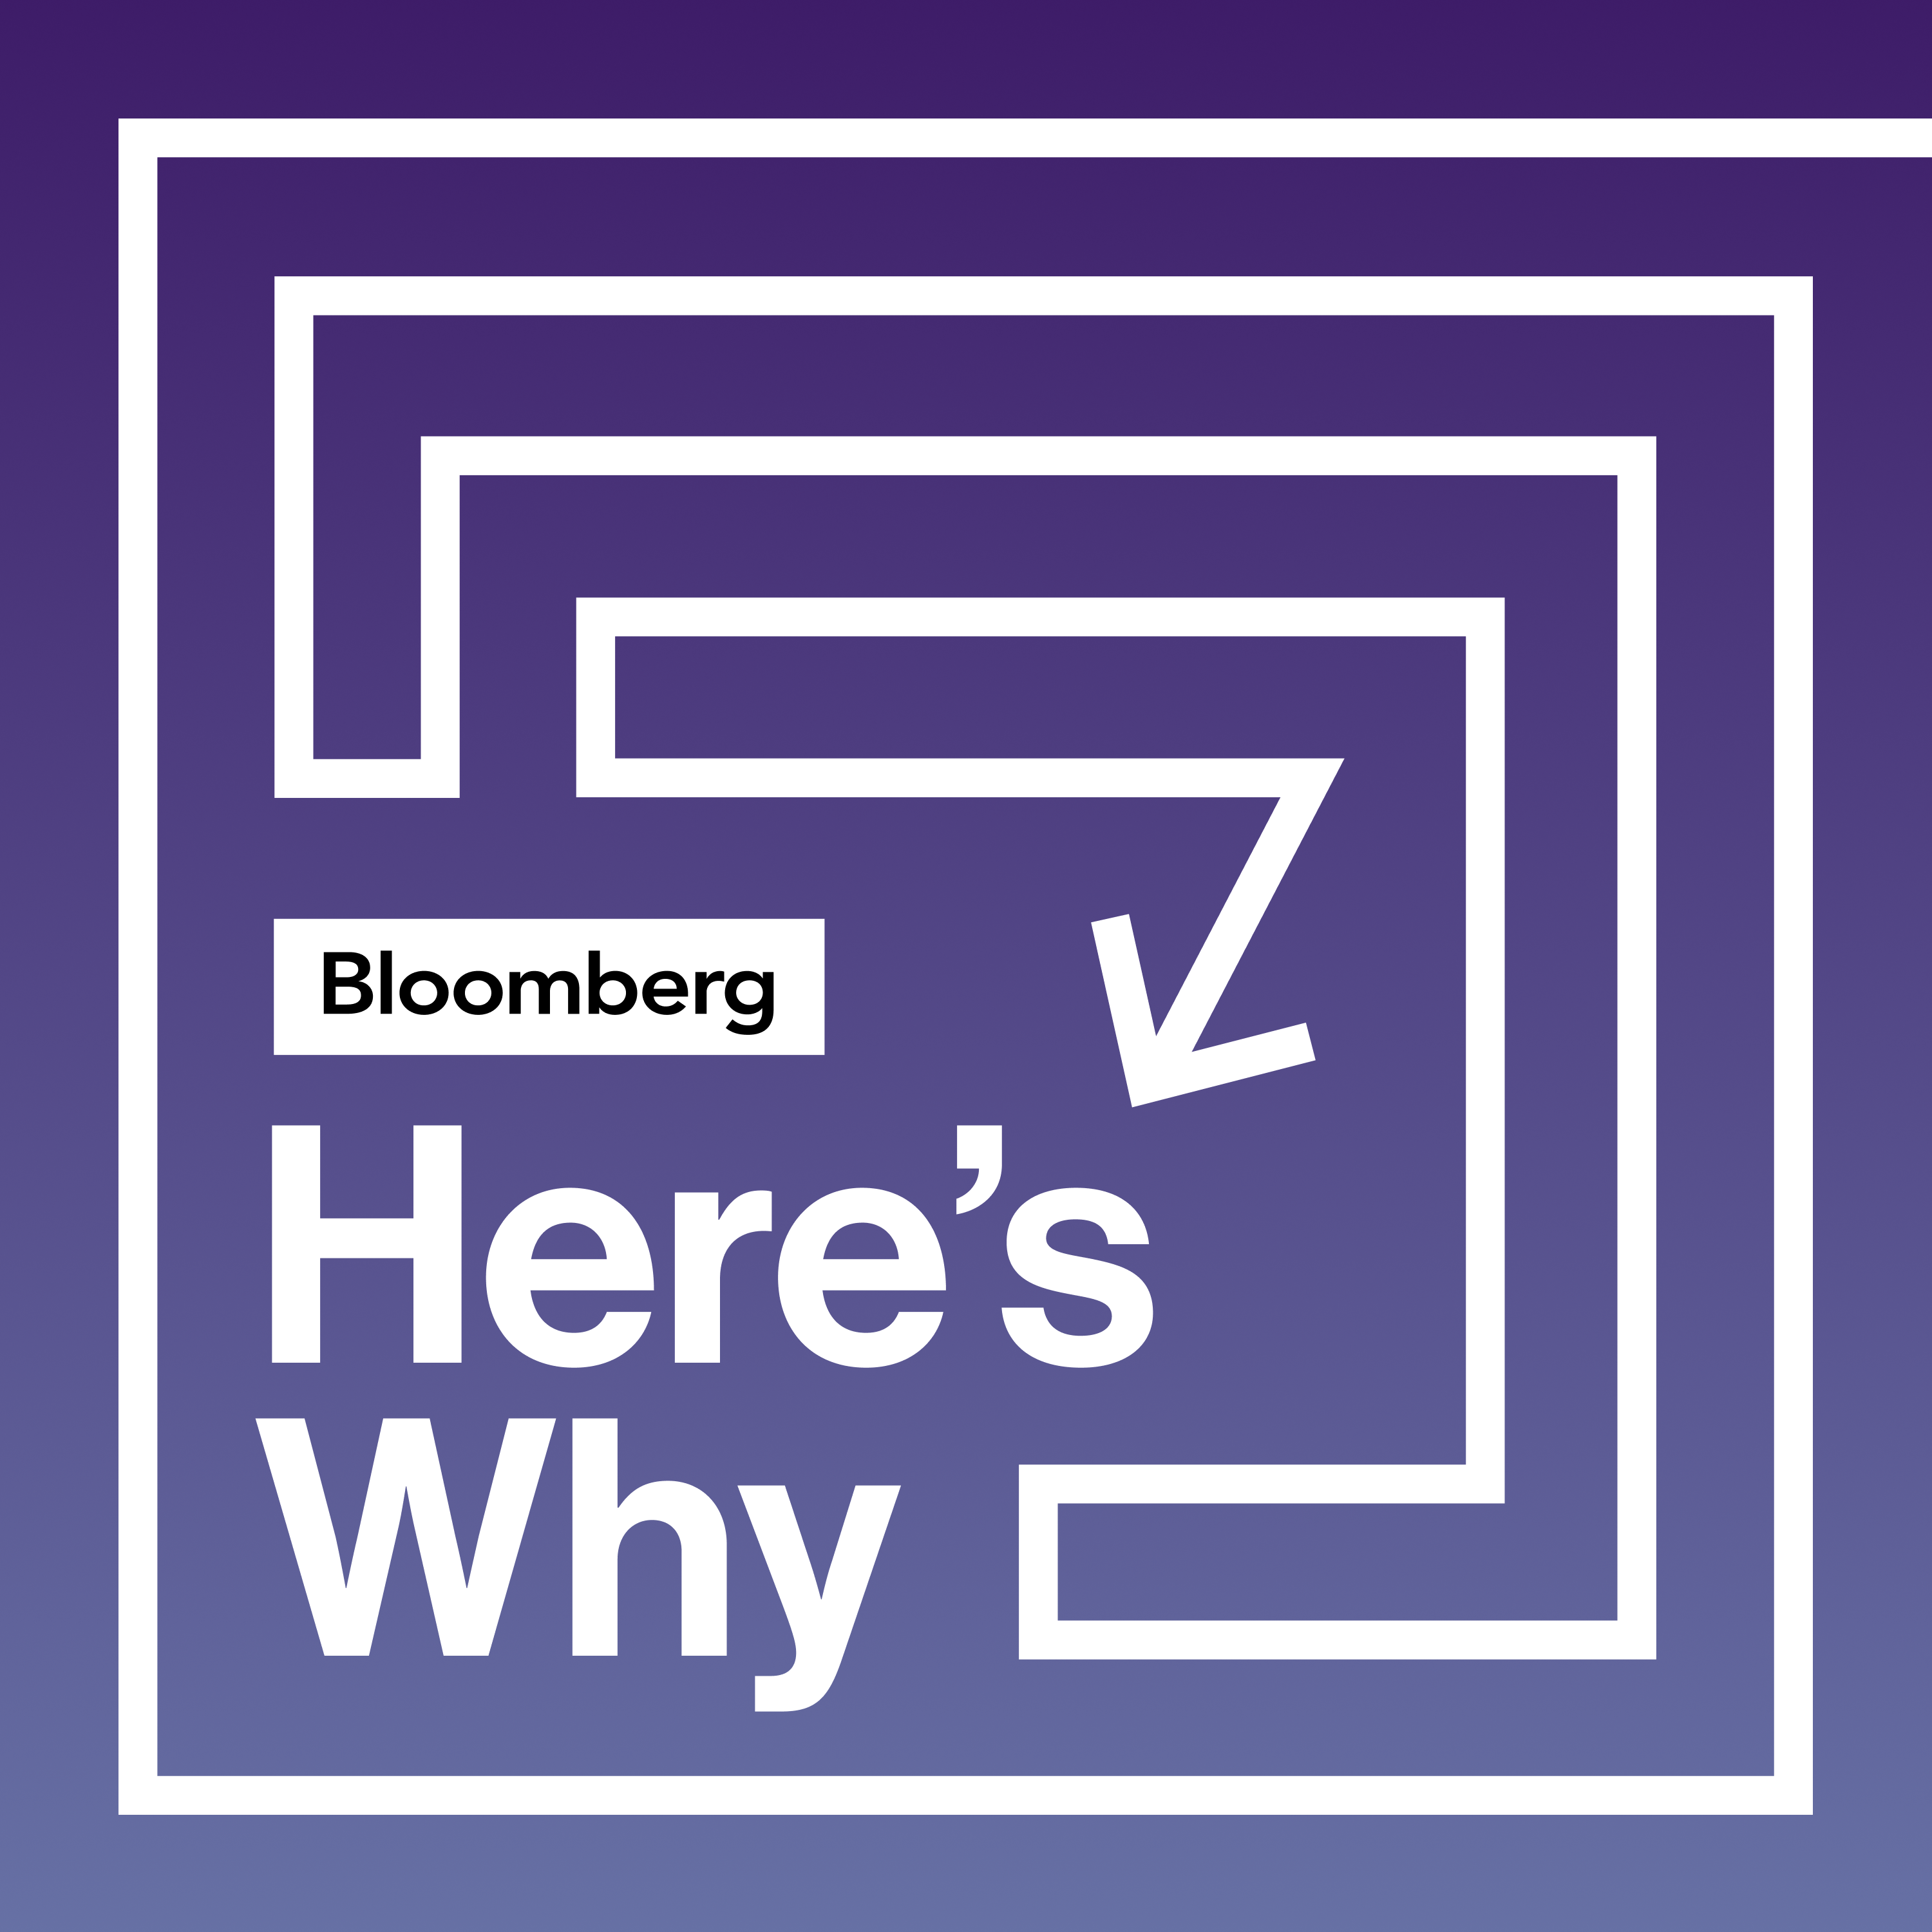 Introducing 'Here's Why' - Complex News Stories Explained